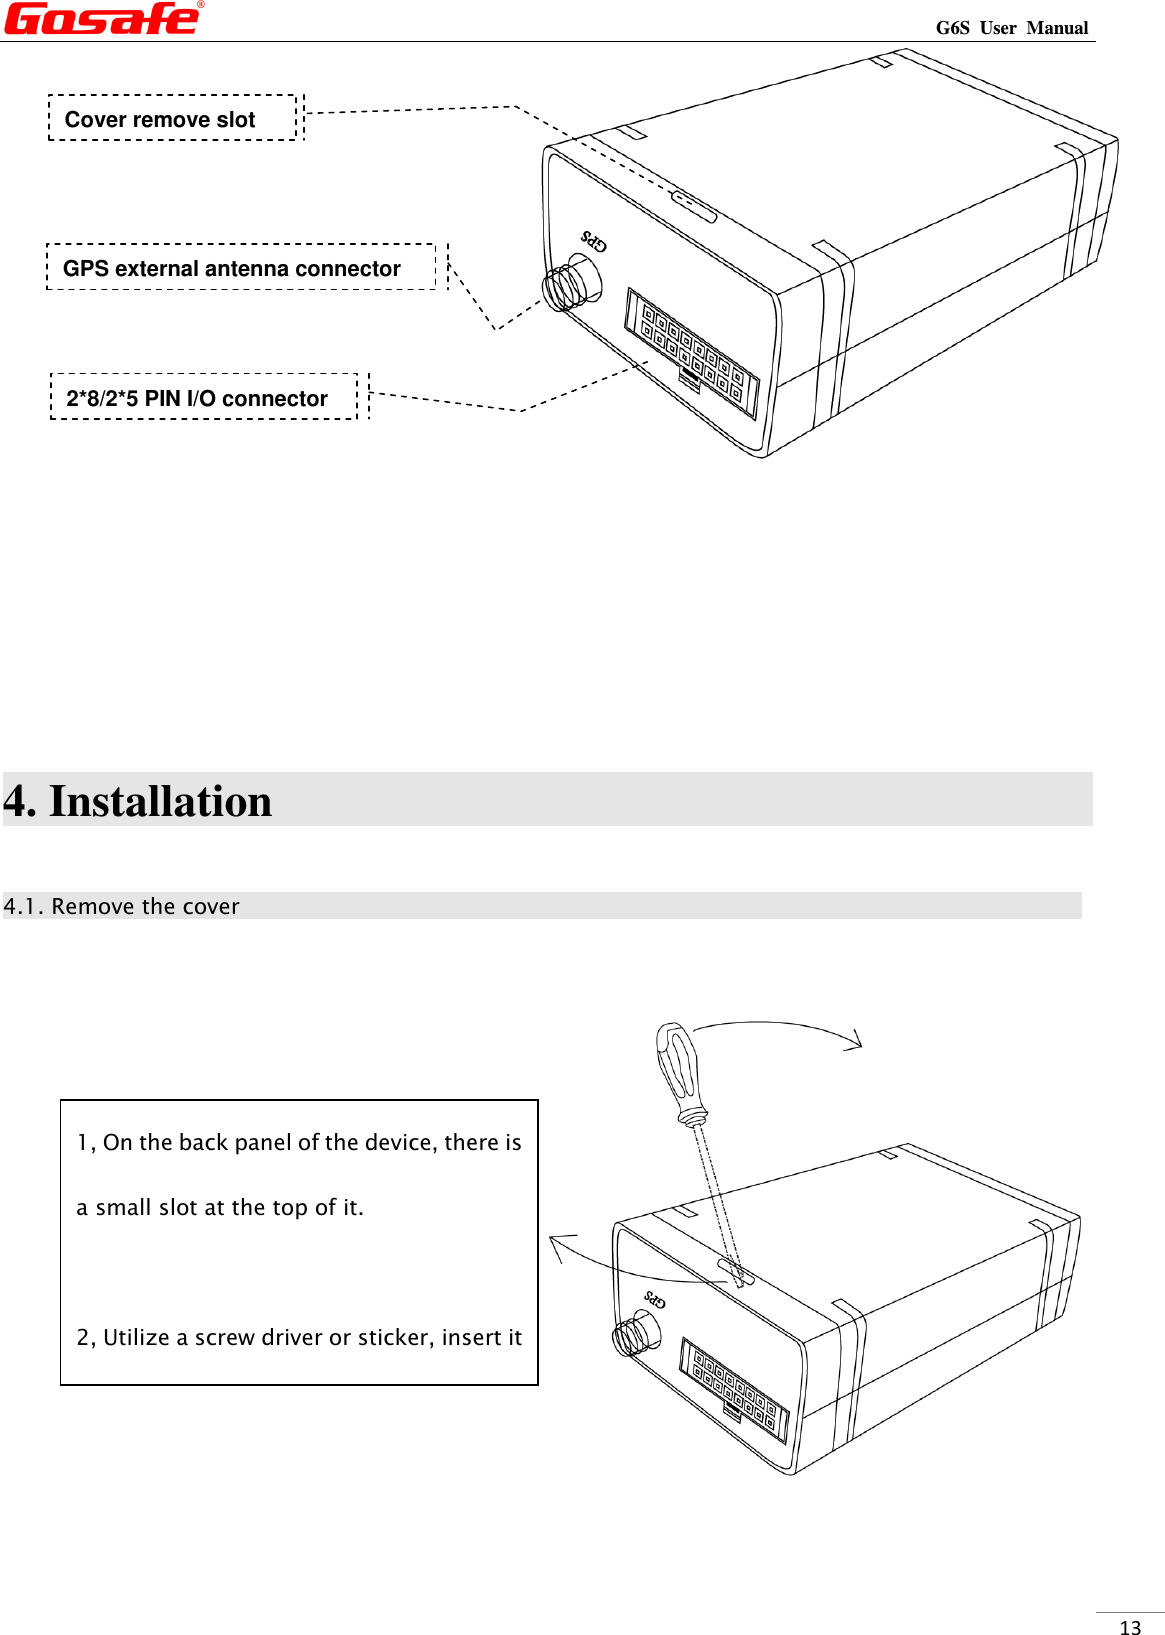                                                                                                                                                             G6S  User  Manual  13      4. Installation                                                                                    4.1. Remove the cover                                                                                        2*8/2*5 PIN I/O connector GPS external antenna connector 1, On the back panel of the device, there is a small slot at the top of it.  2, Utilize a screw driver or sticker, insert it Cover remove slot 